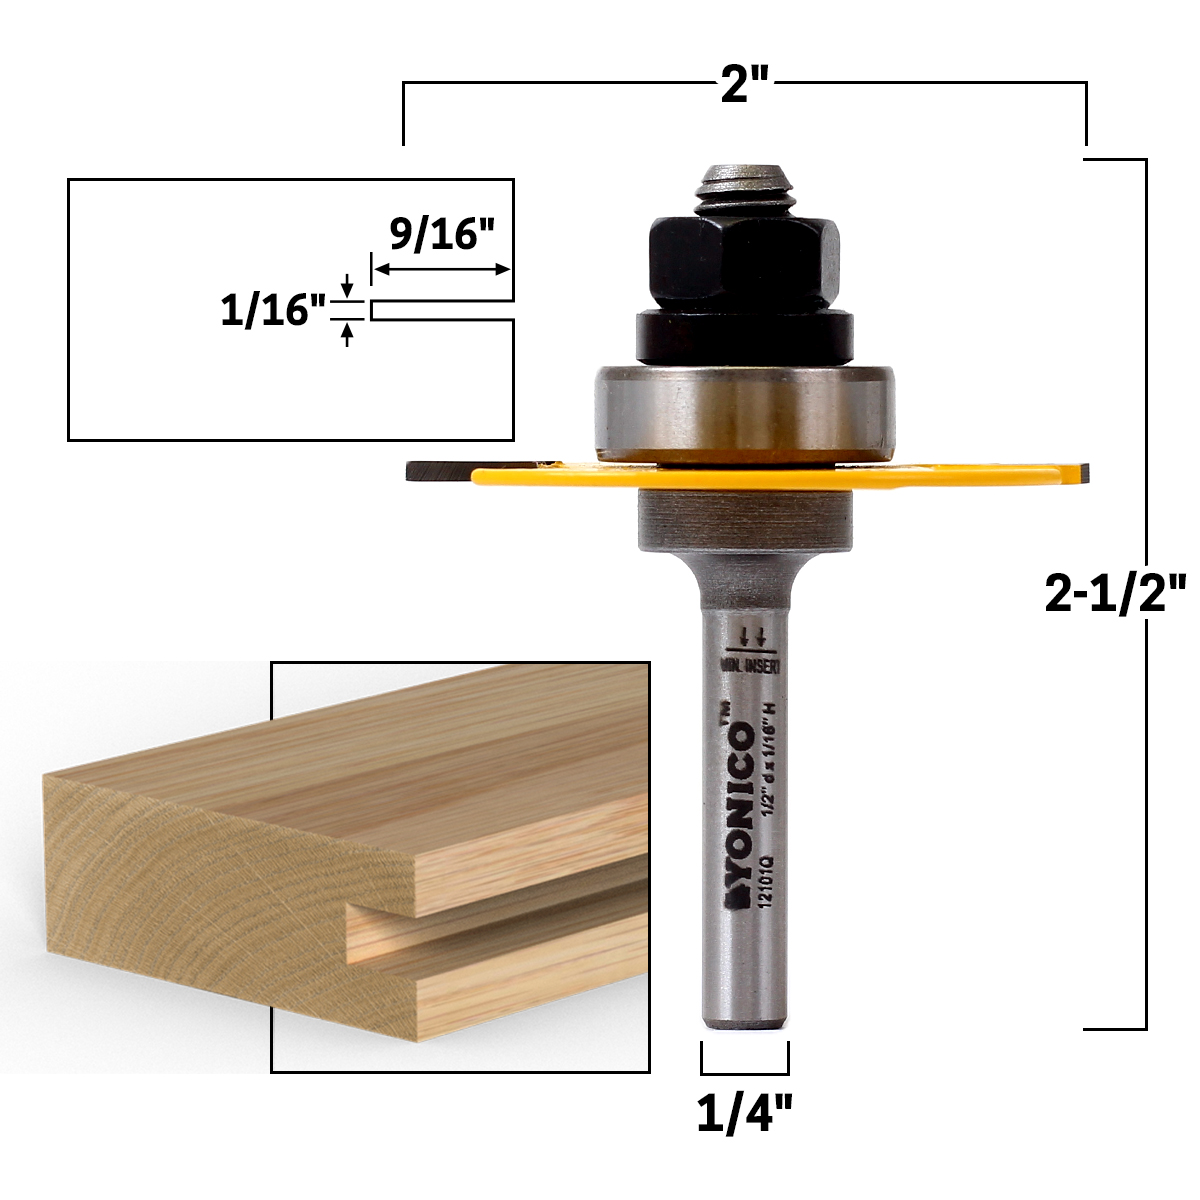 Slot Cutter Wing Groove Router Bit Set 1/2" & 1/4" Shank 6x Removable Blade 1/4" 